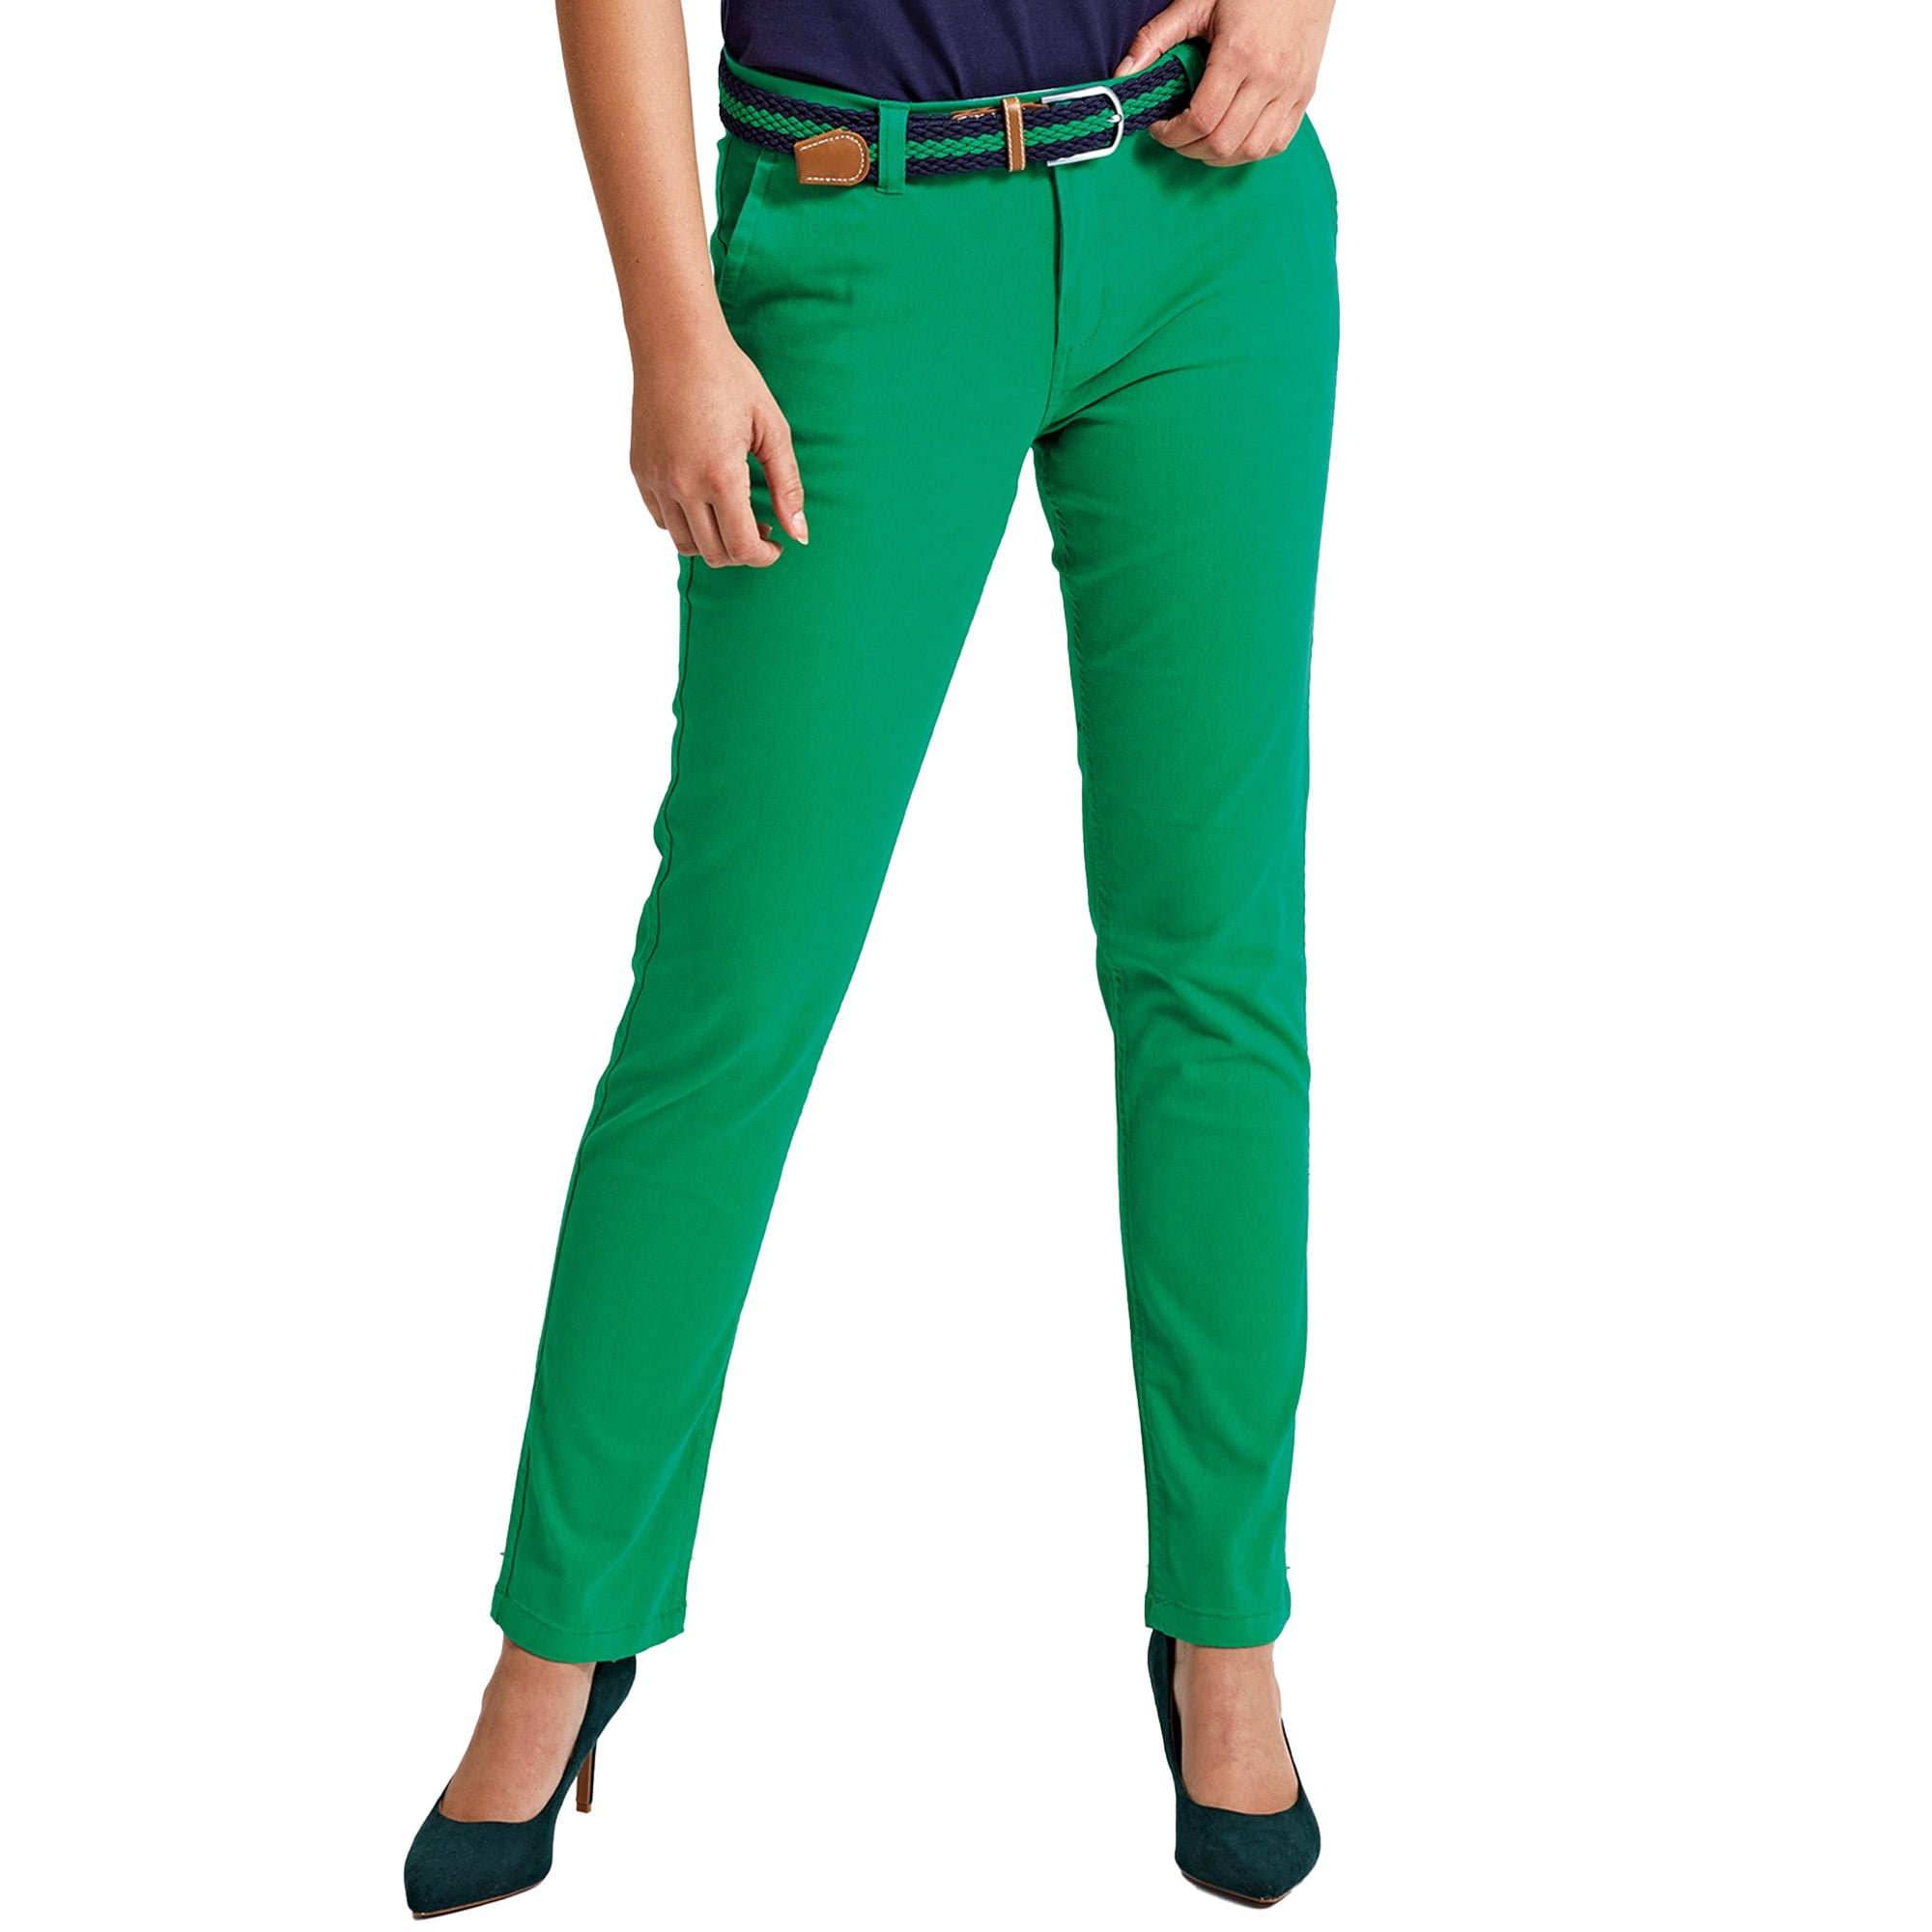 Poster Girl Synthetic Green Pebbles leggings Womens Clothing Trousers Slacks and Chinos Full-length trousers 